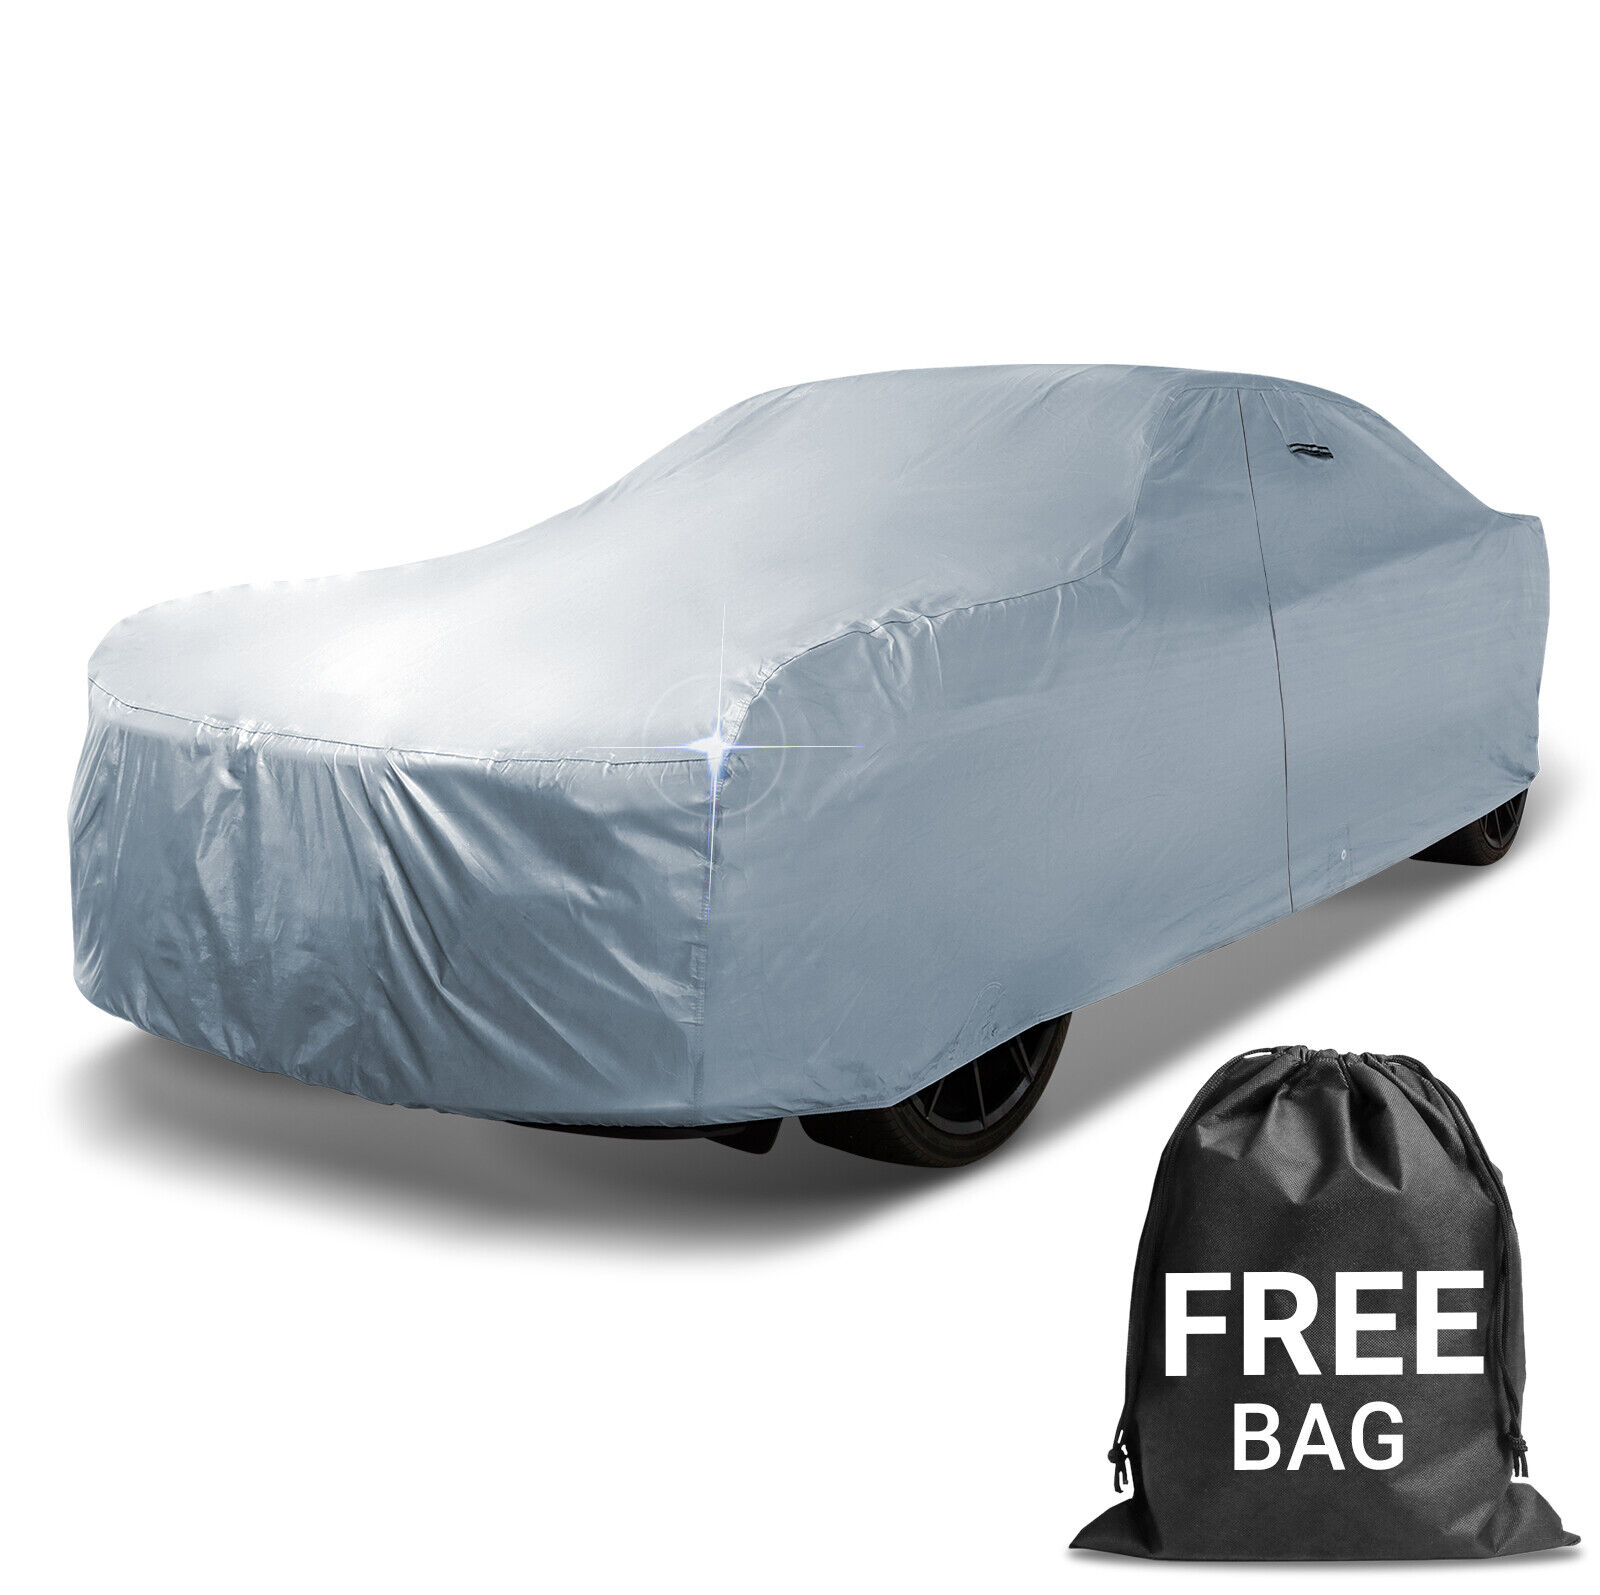 CHEVY [EL CAMINO] Custom Waterproof Outdoor Car Cover - All Weather Protection